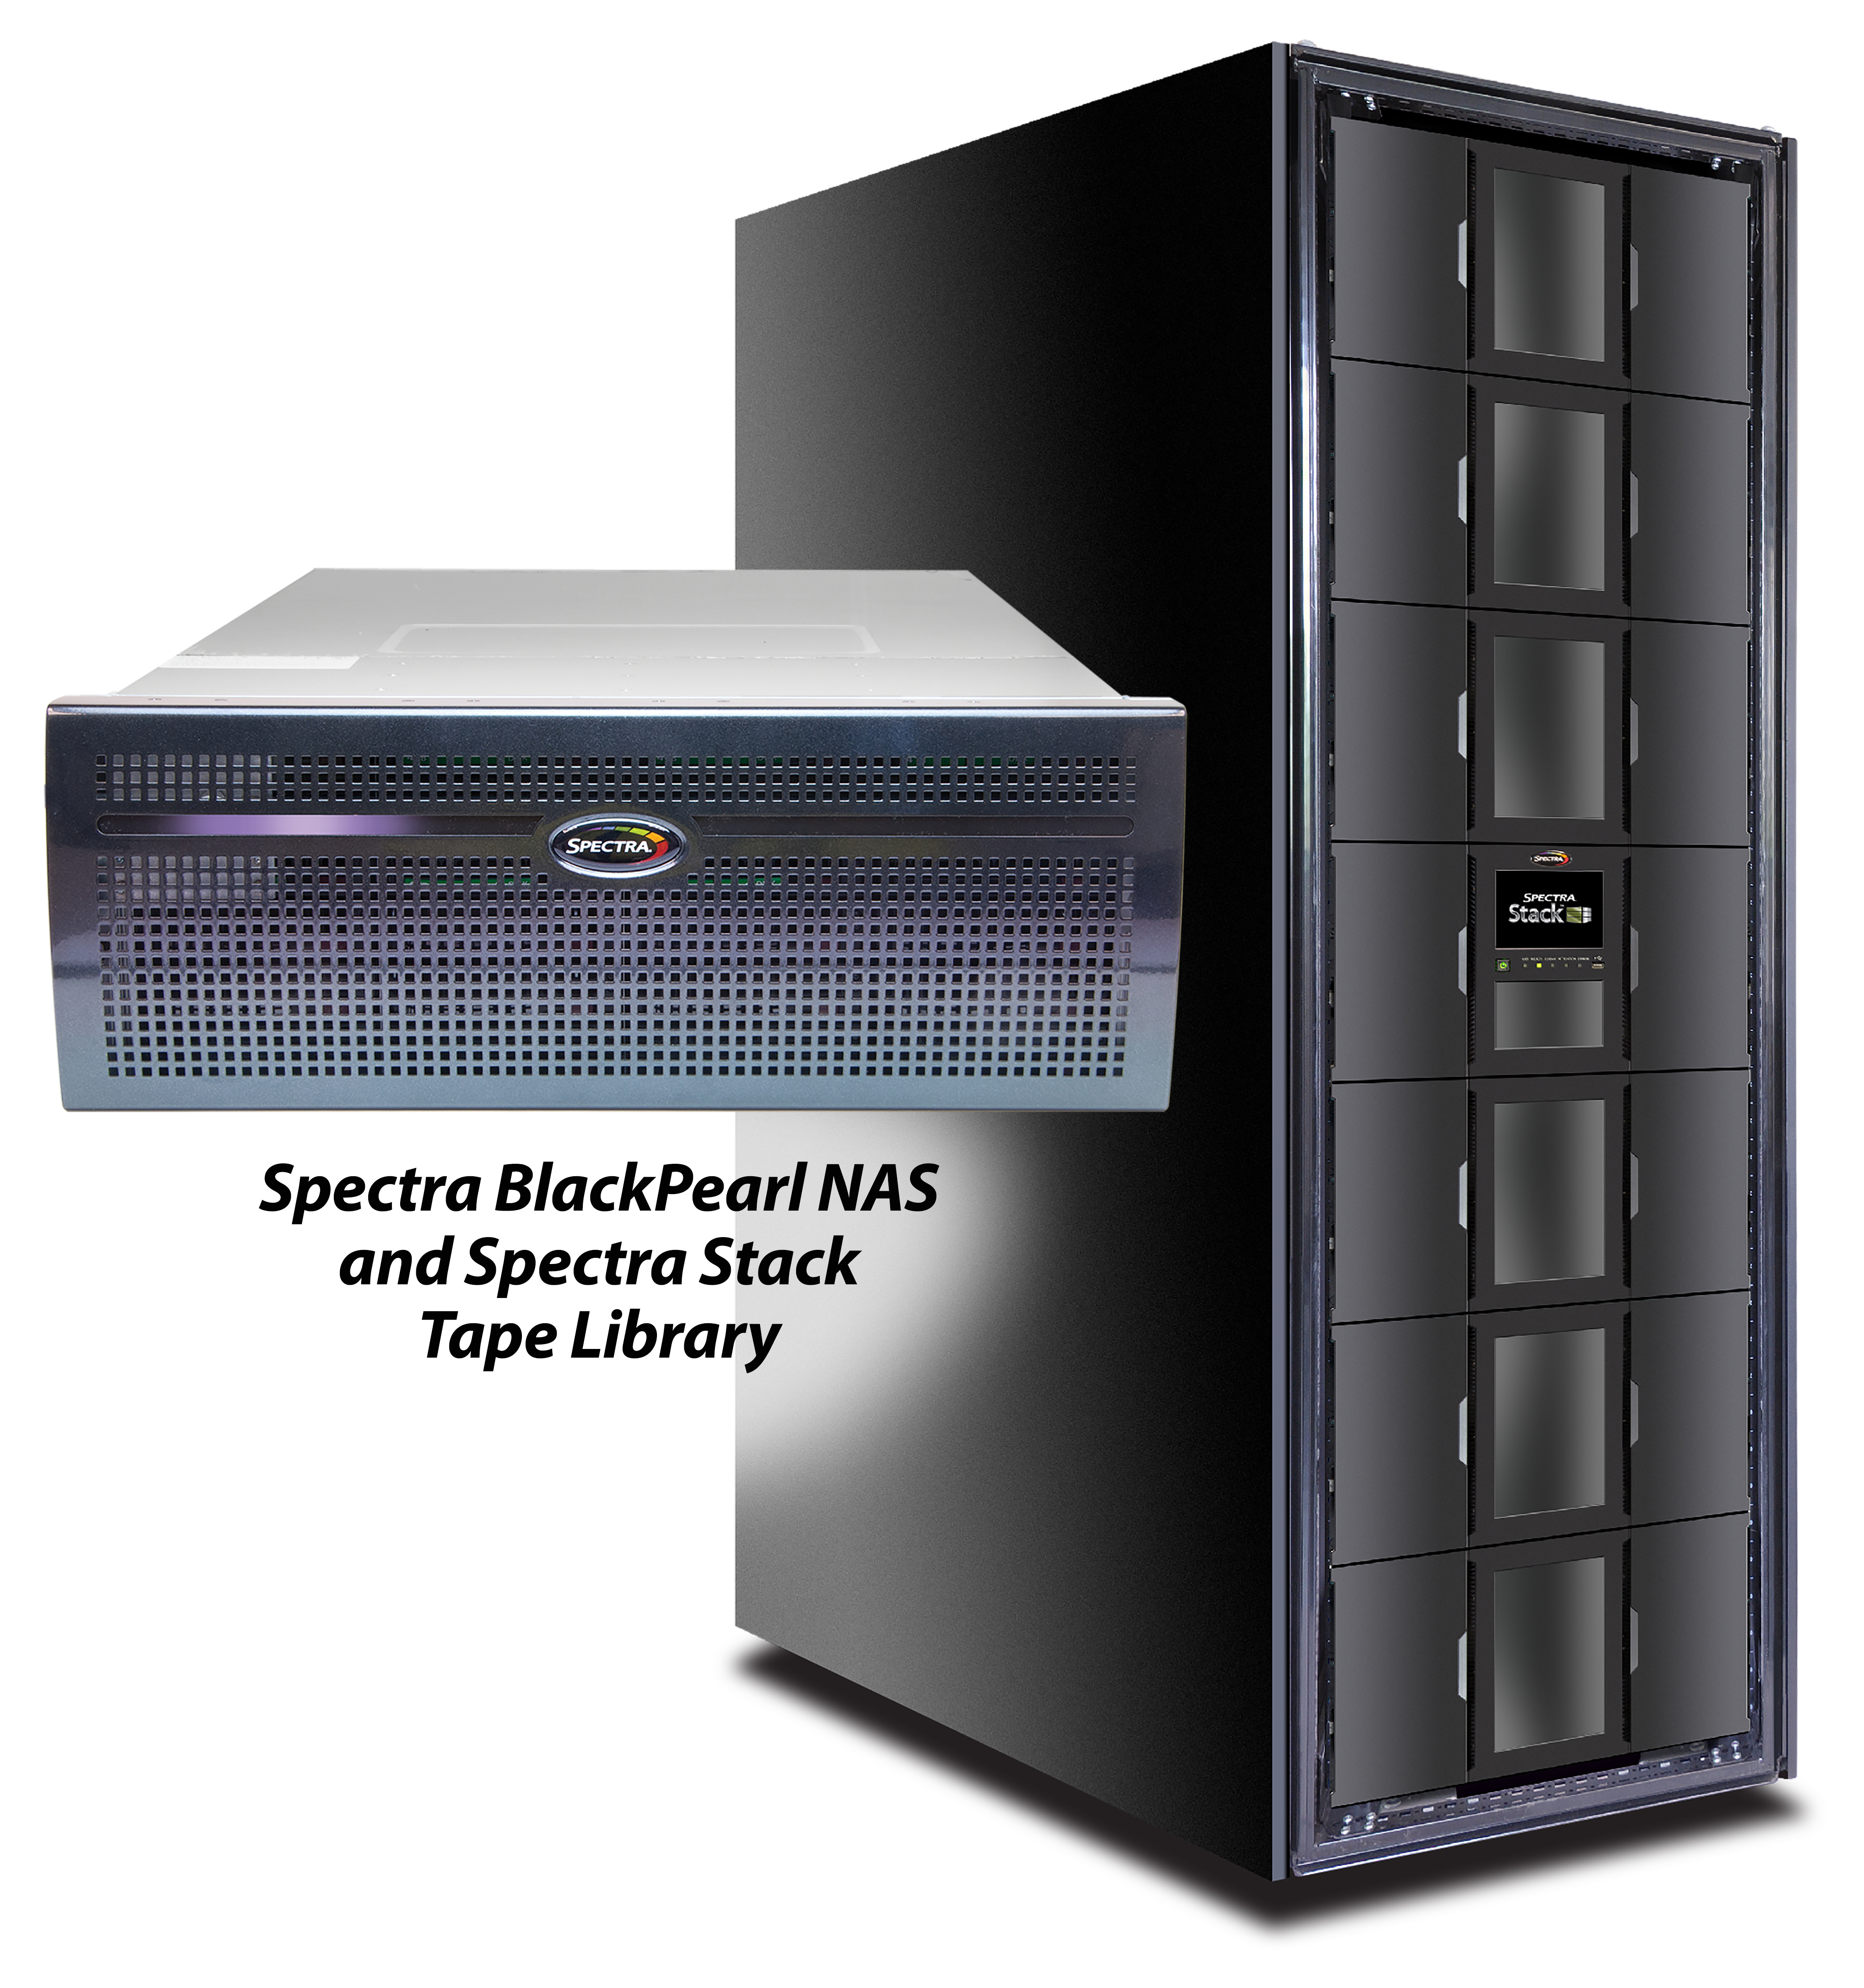 Spectra Logic BlackPearl NAS and Spectra Stack Tape Library